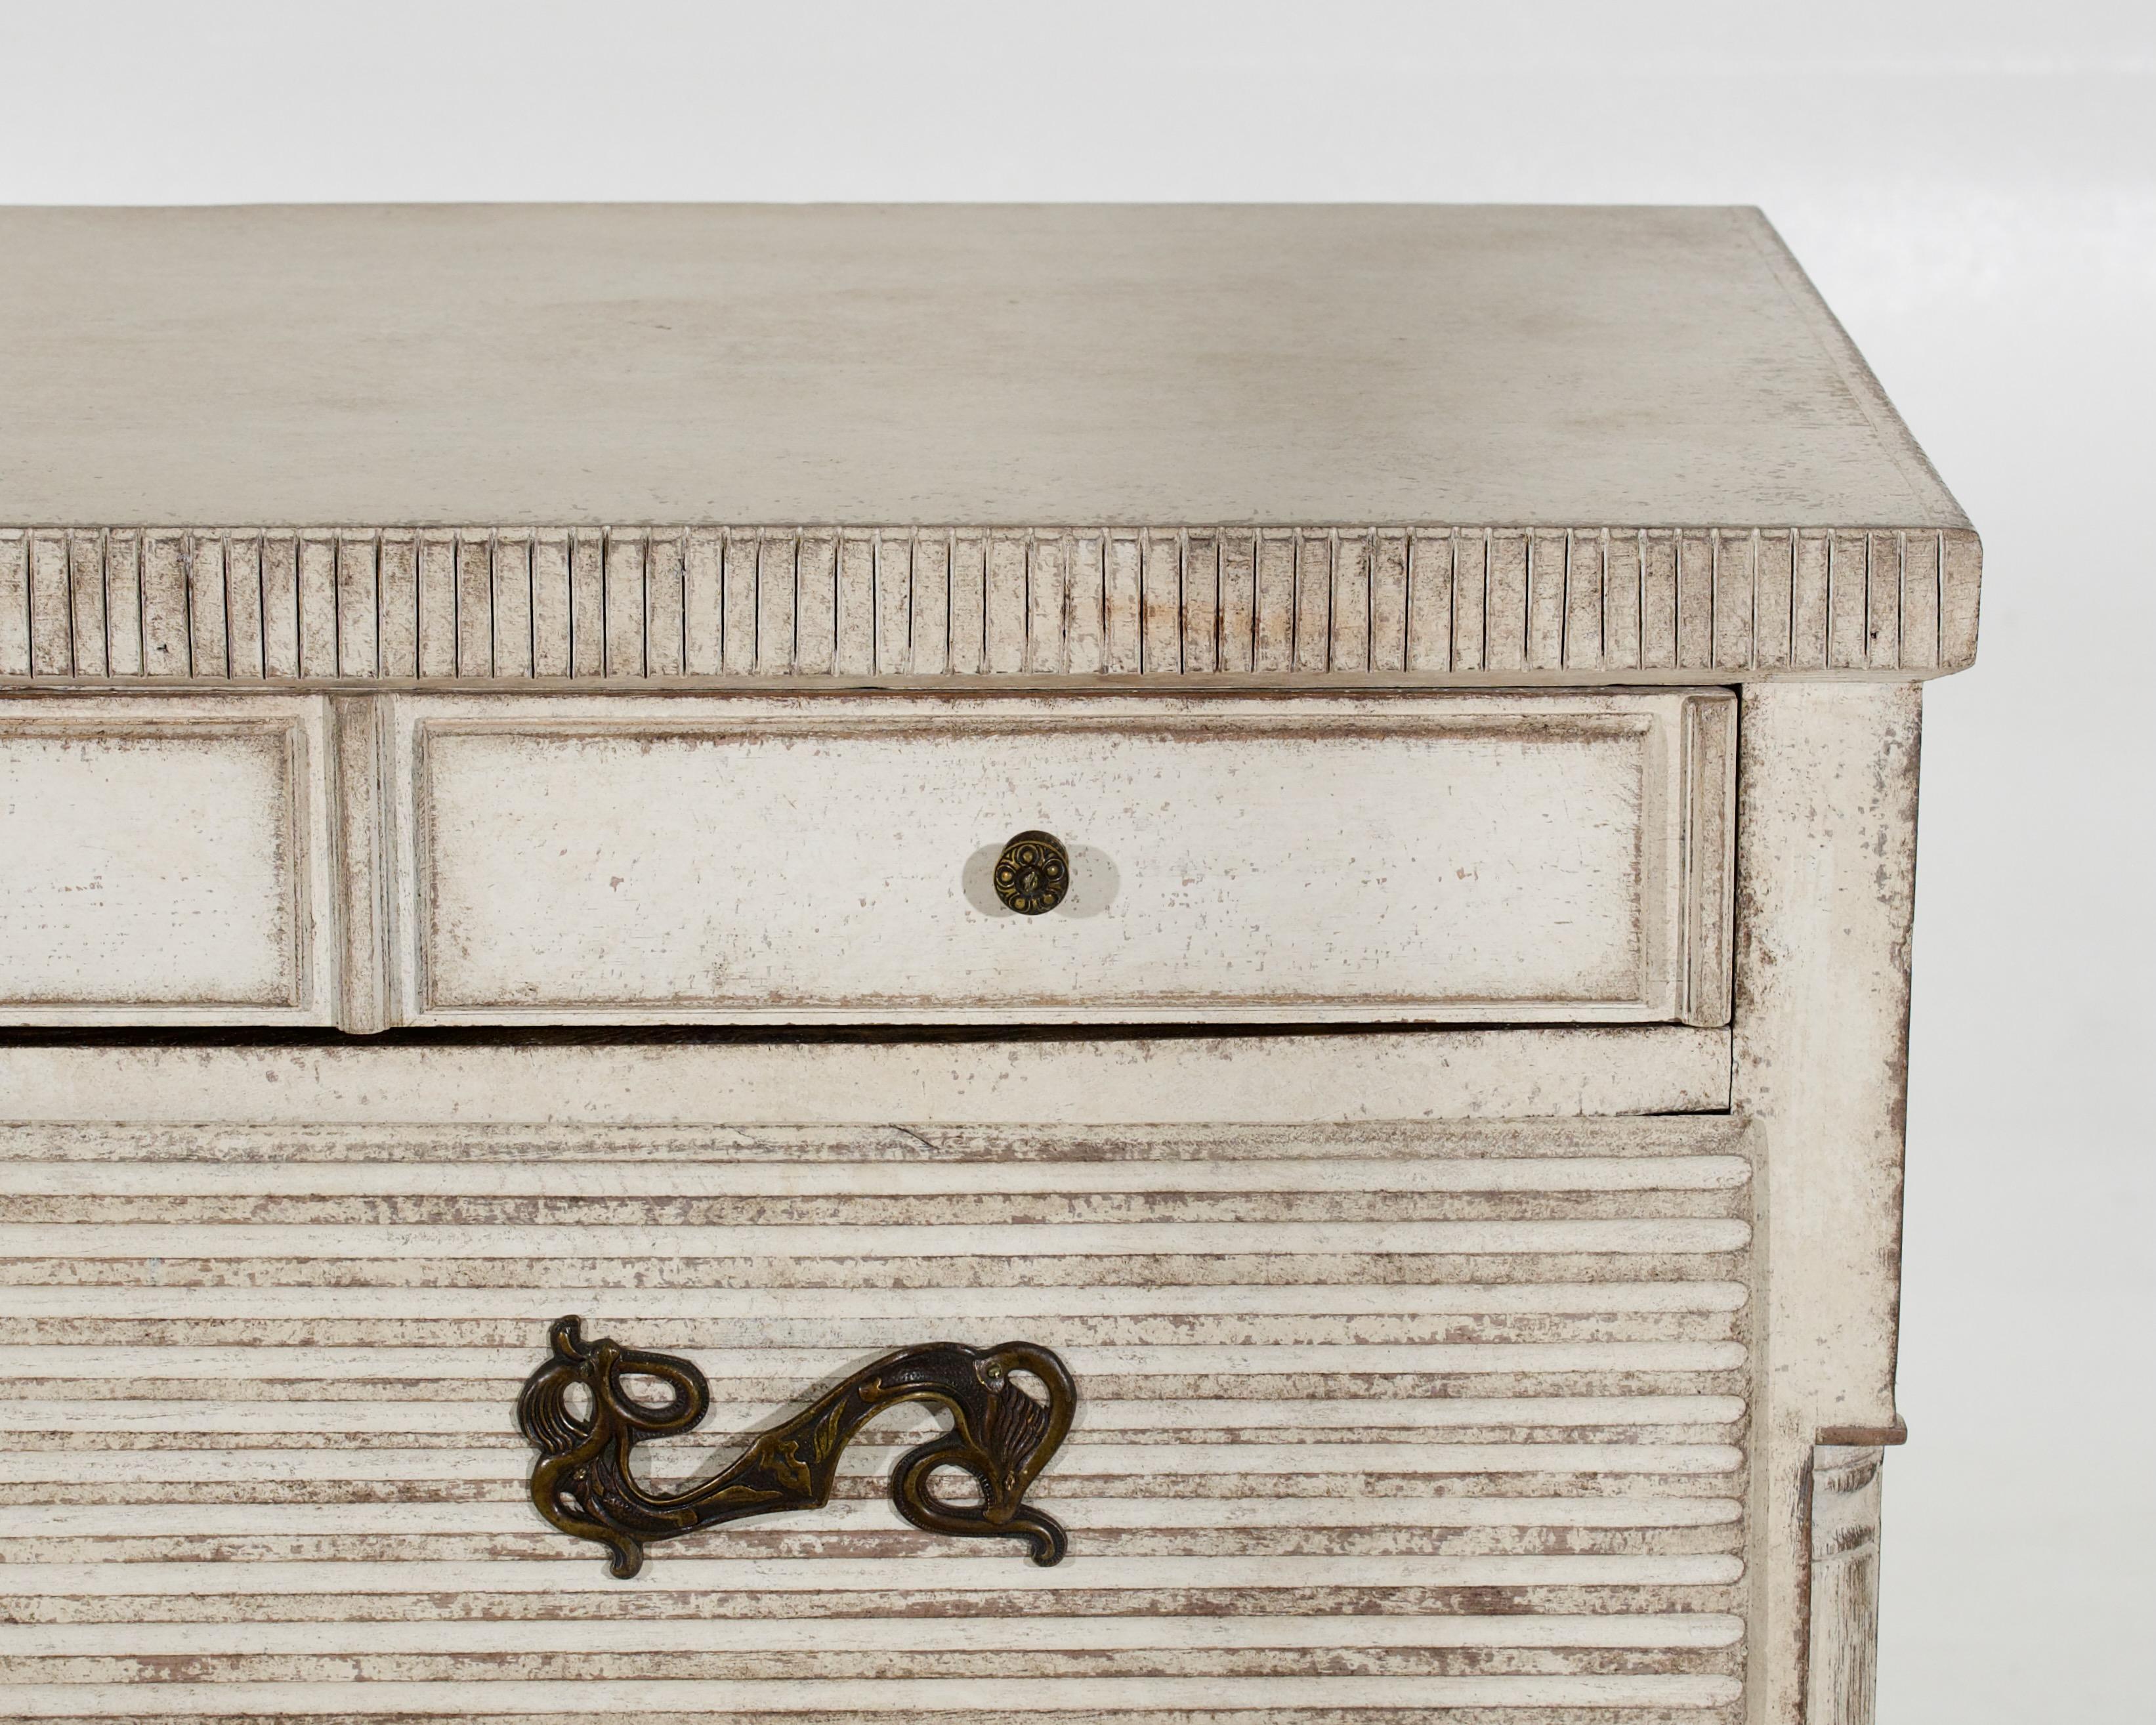 Fine Swedish chest with five drawers, beautiful carvings, richly carved. Original hardware, circa 1790 - 1810.